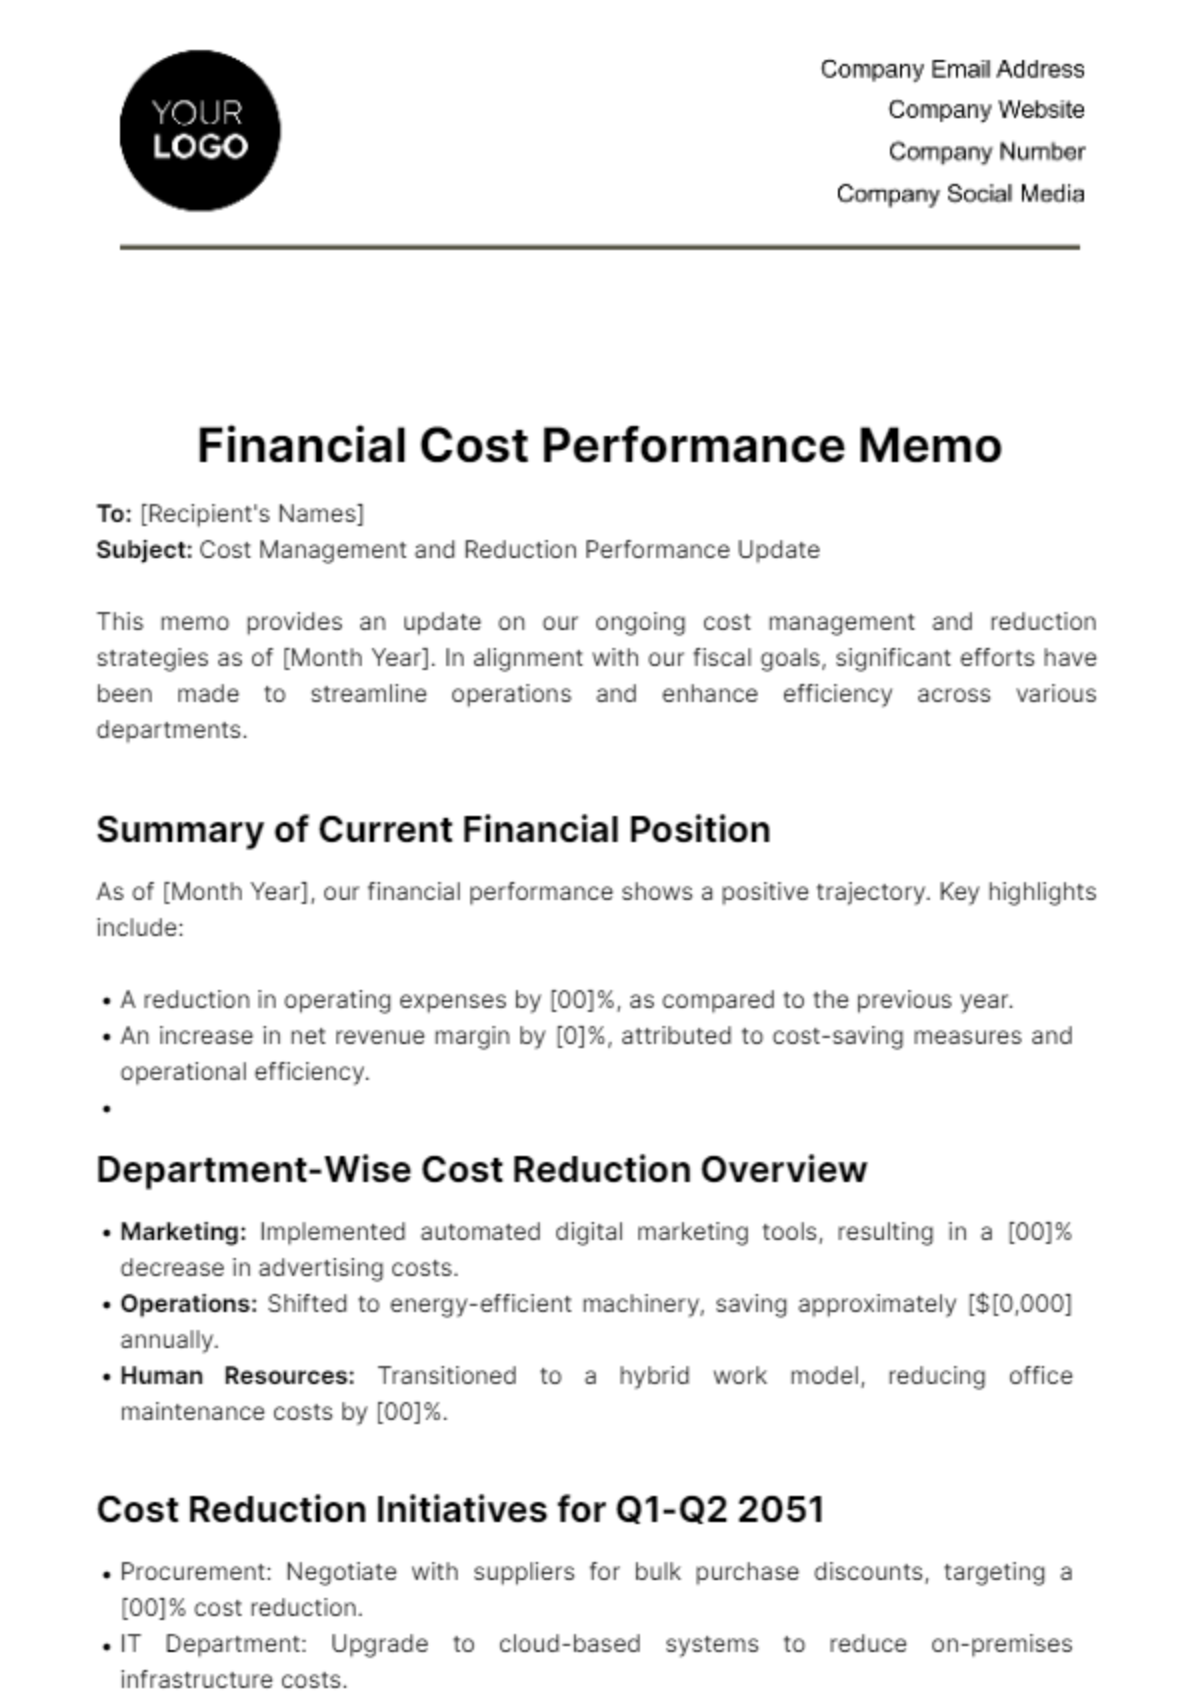 Free Financial Cost Performance Memo Template